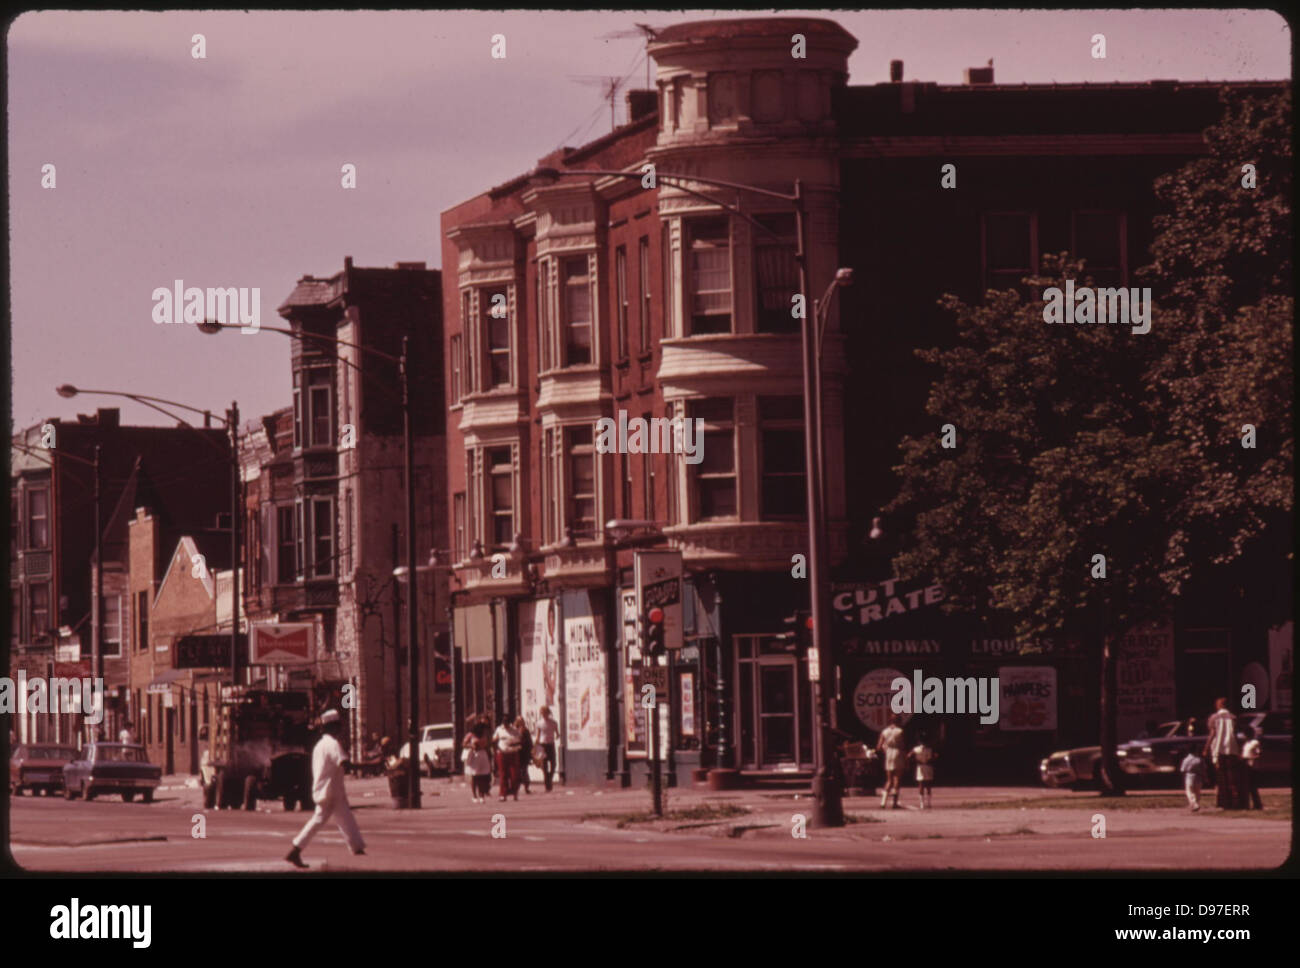 South Side Black Community In Chicago With Small Businesses And Apartments Over The Stores In The Older Buildings Near 43rd And Stock Photo